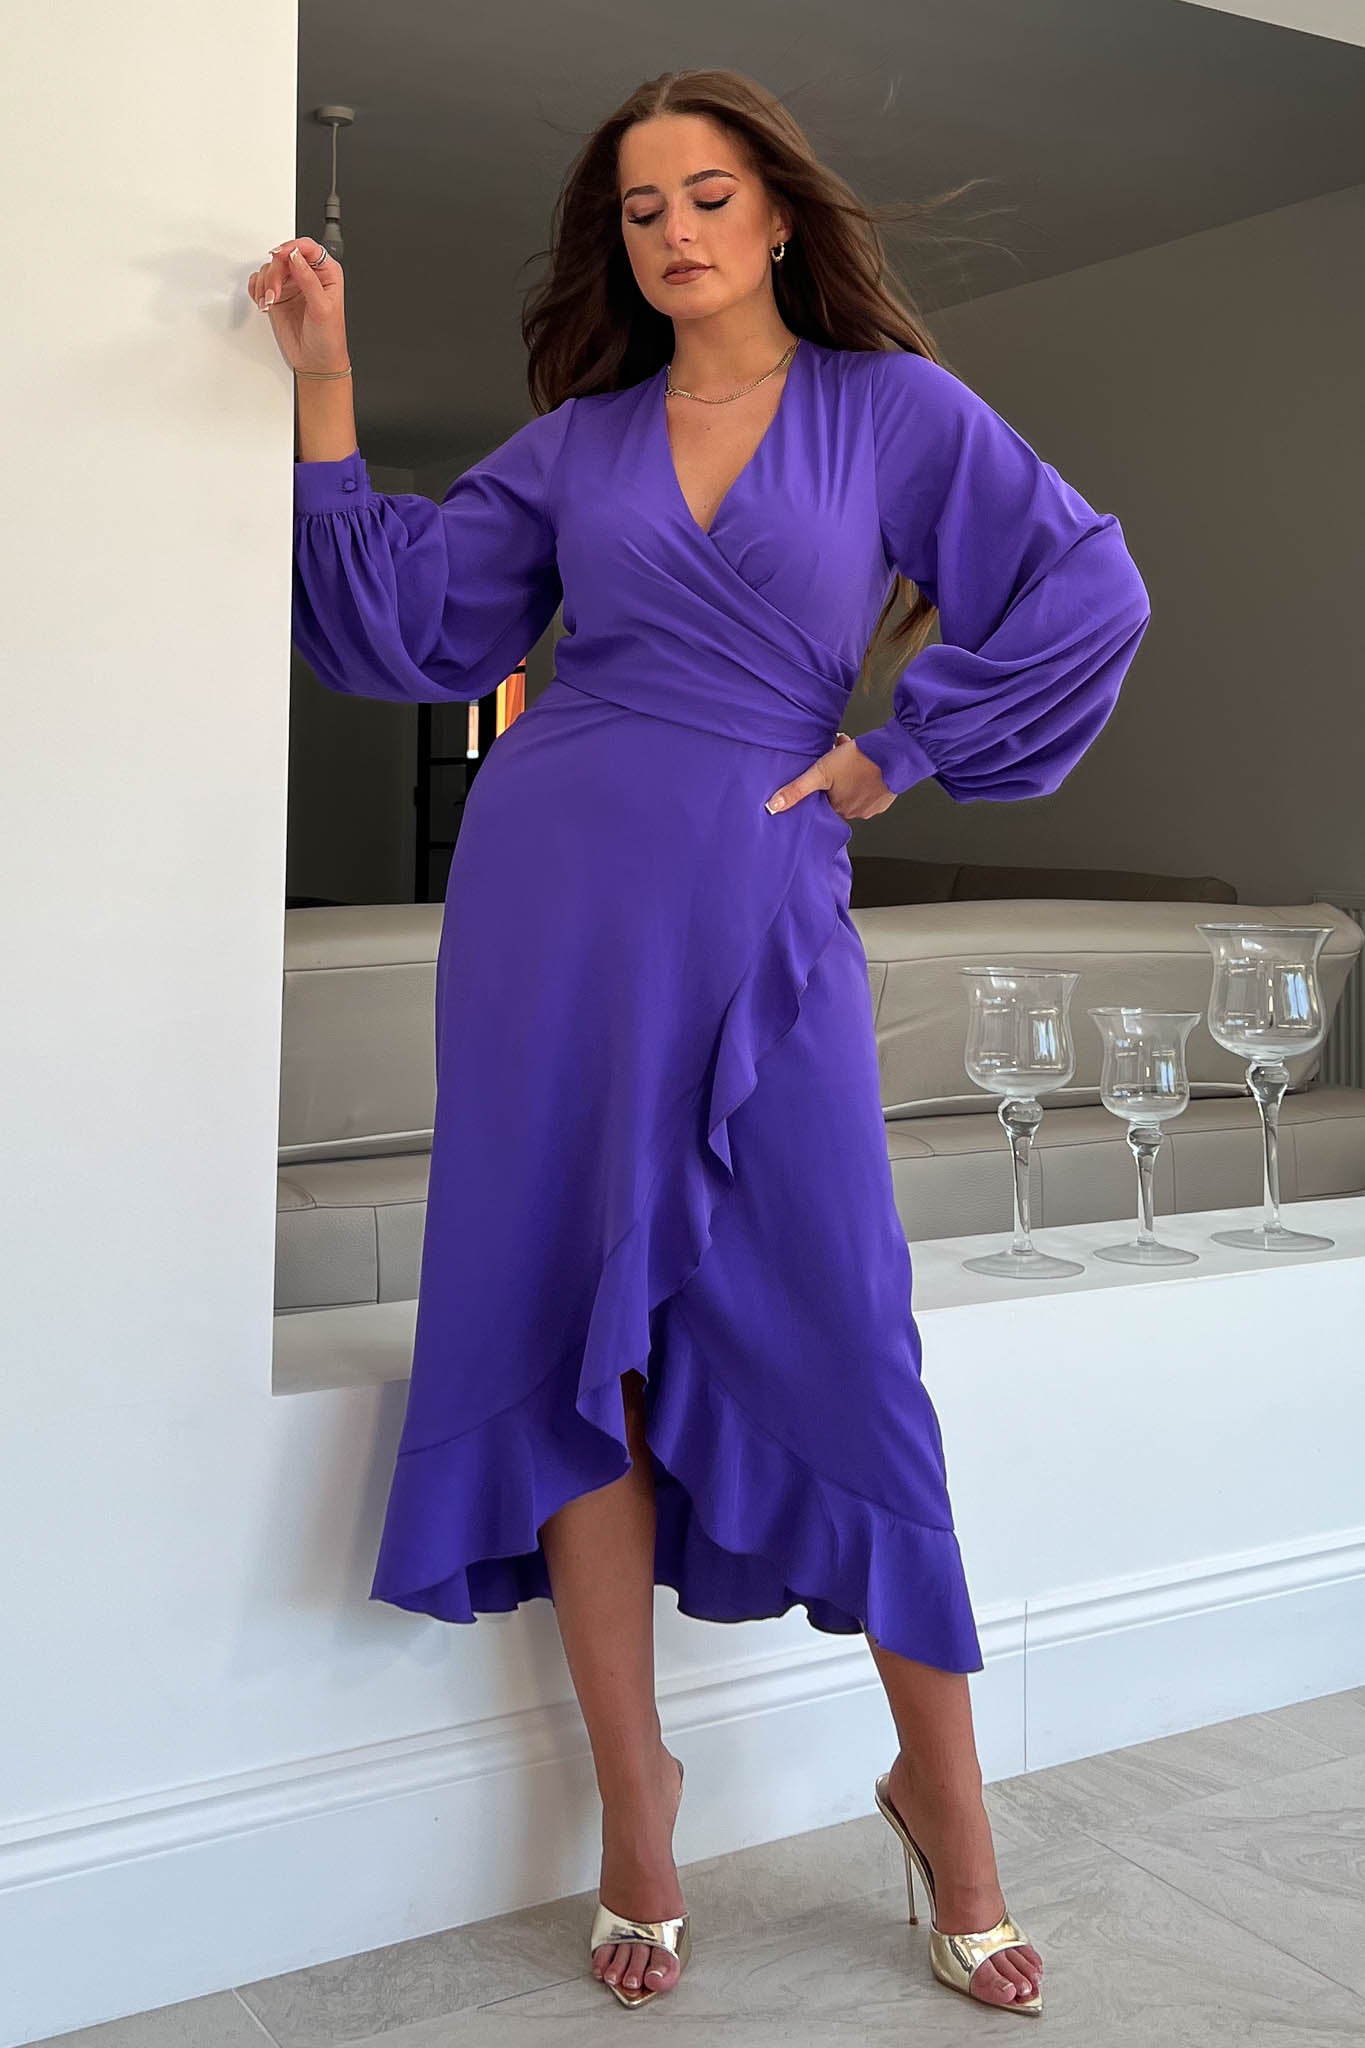 Elea Violet Wrap Dress with Frill Skirt Detailing